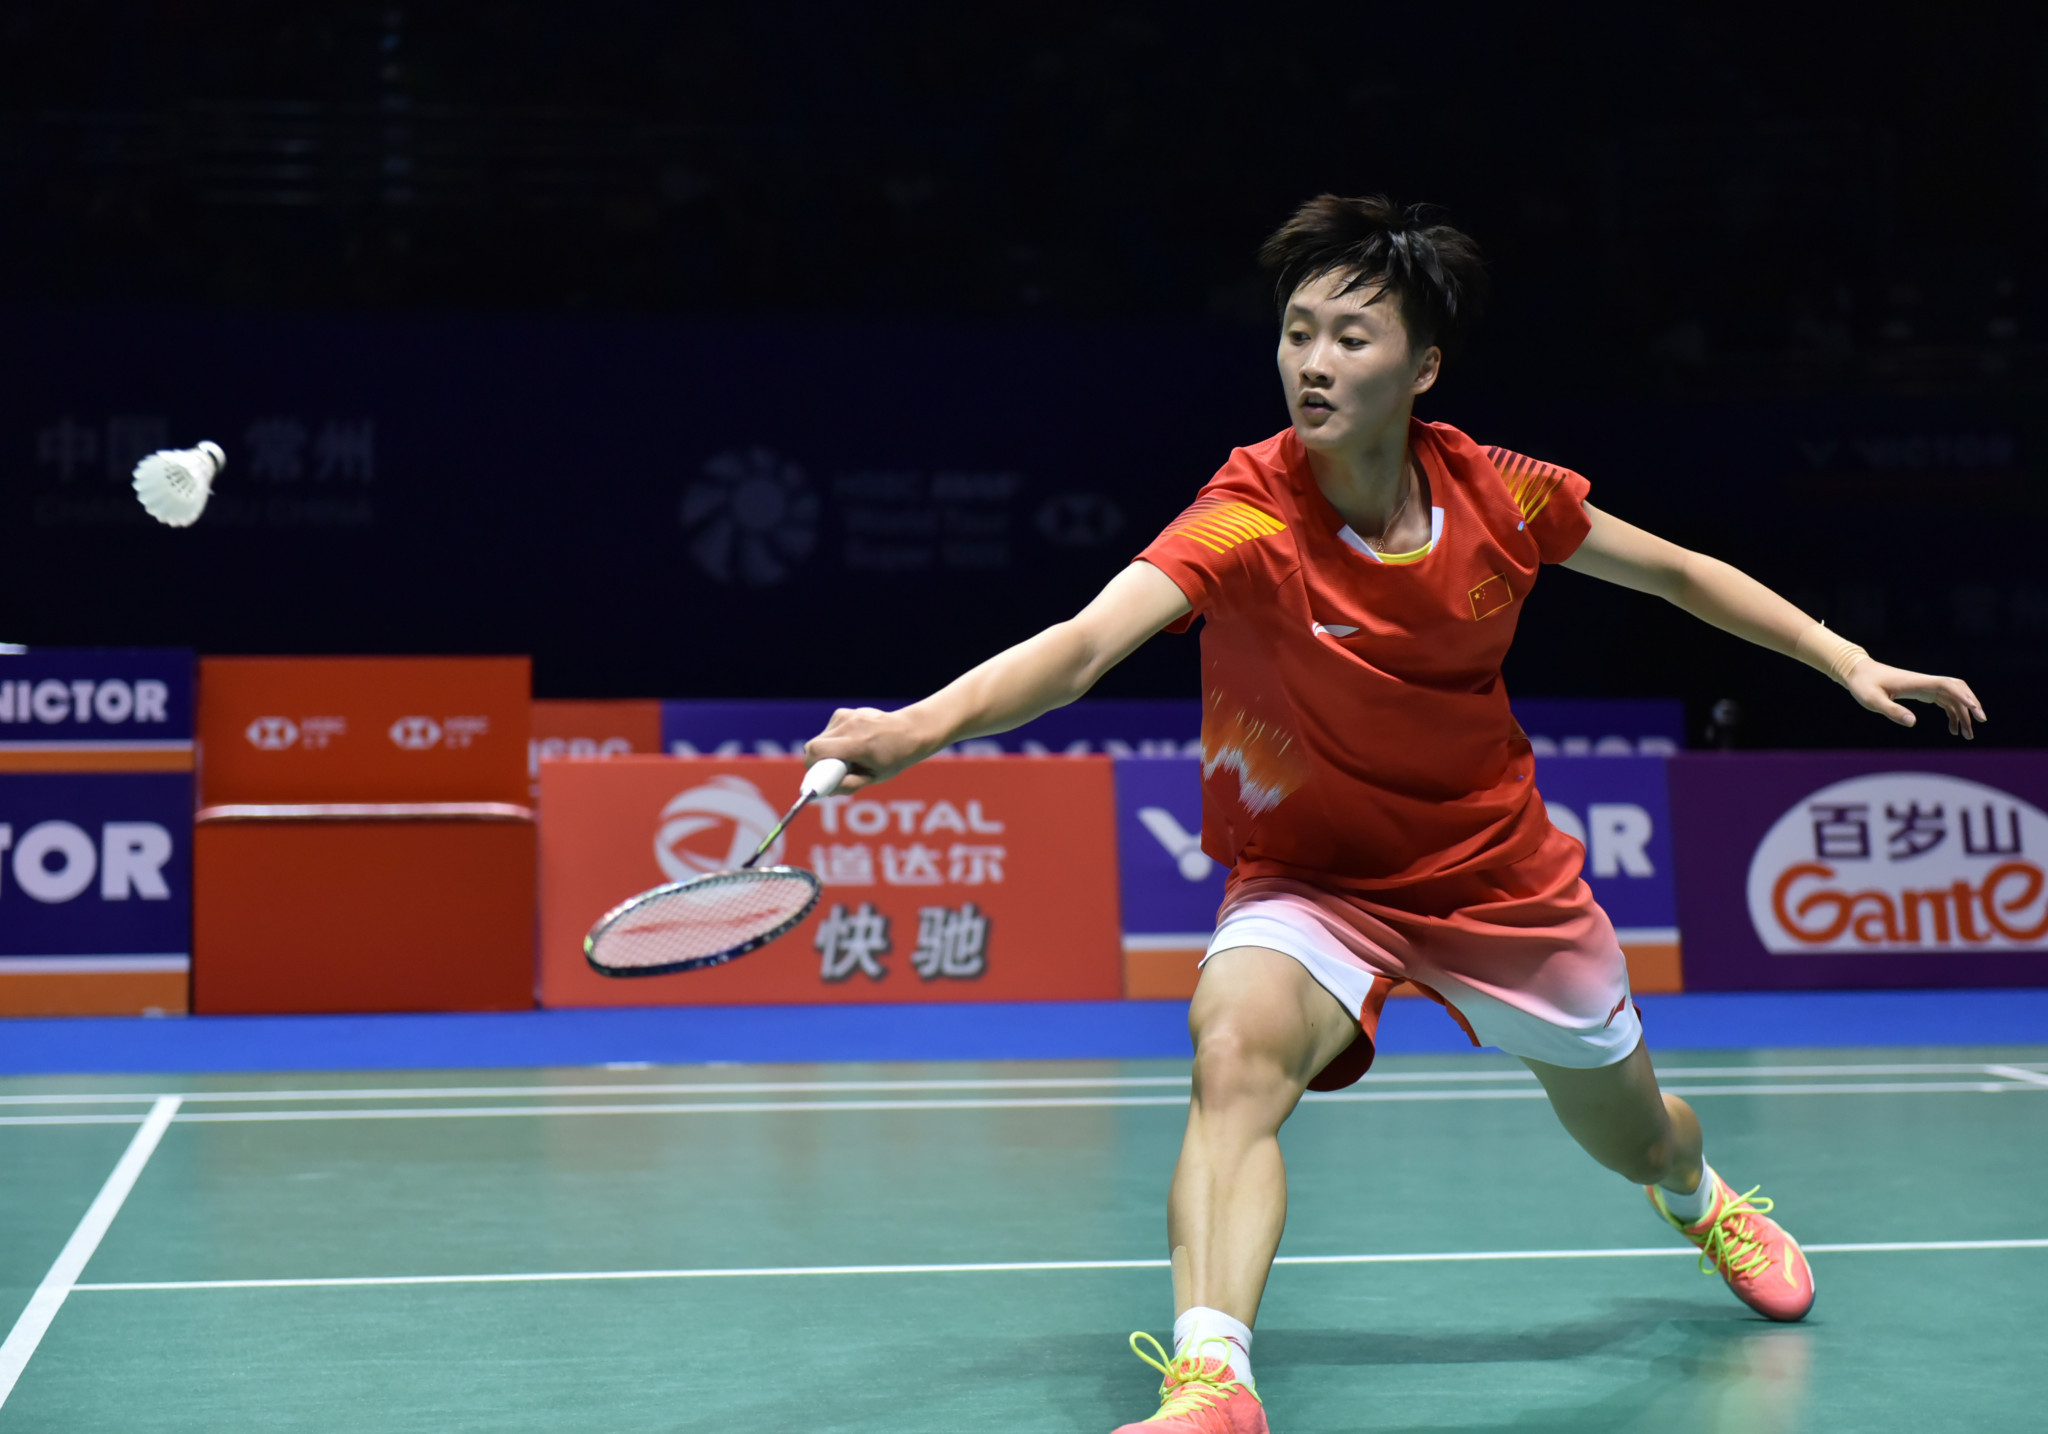 China's Chen Yufei beat defending champion Akane Yamaguchi of Japan to secure her place in the women's singles final ©Getty Images